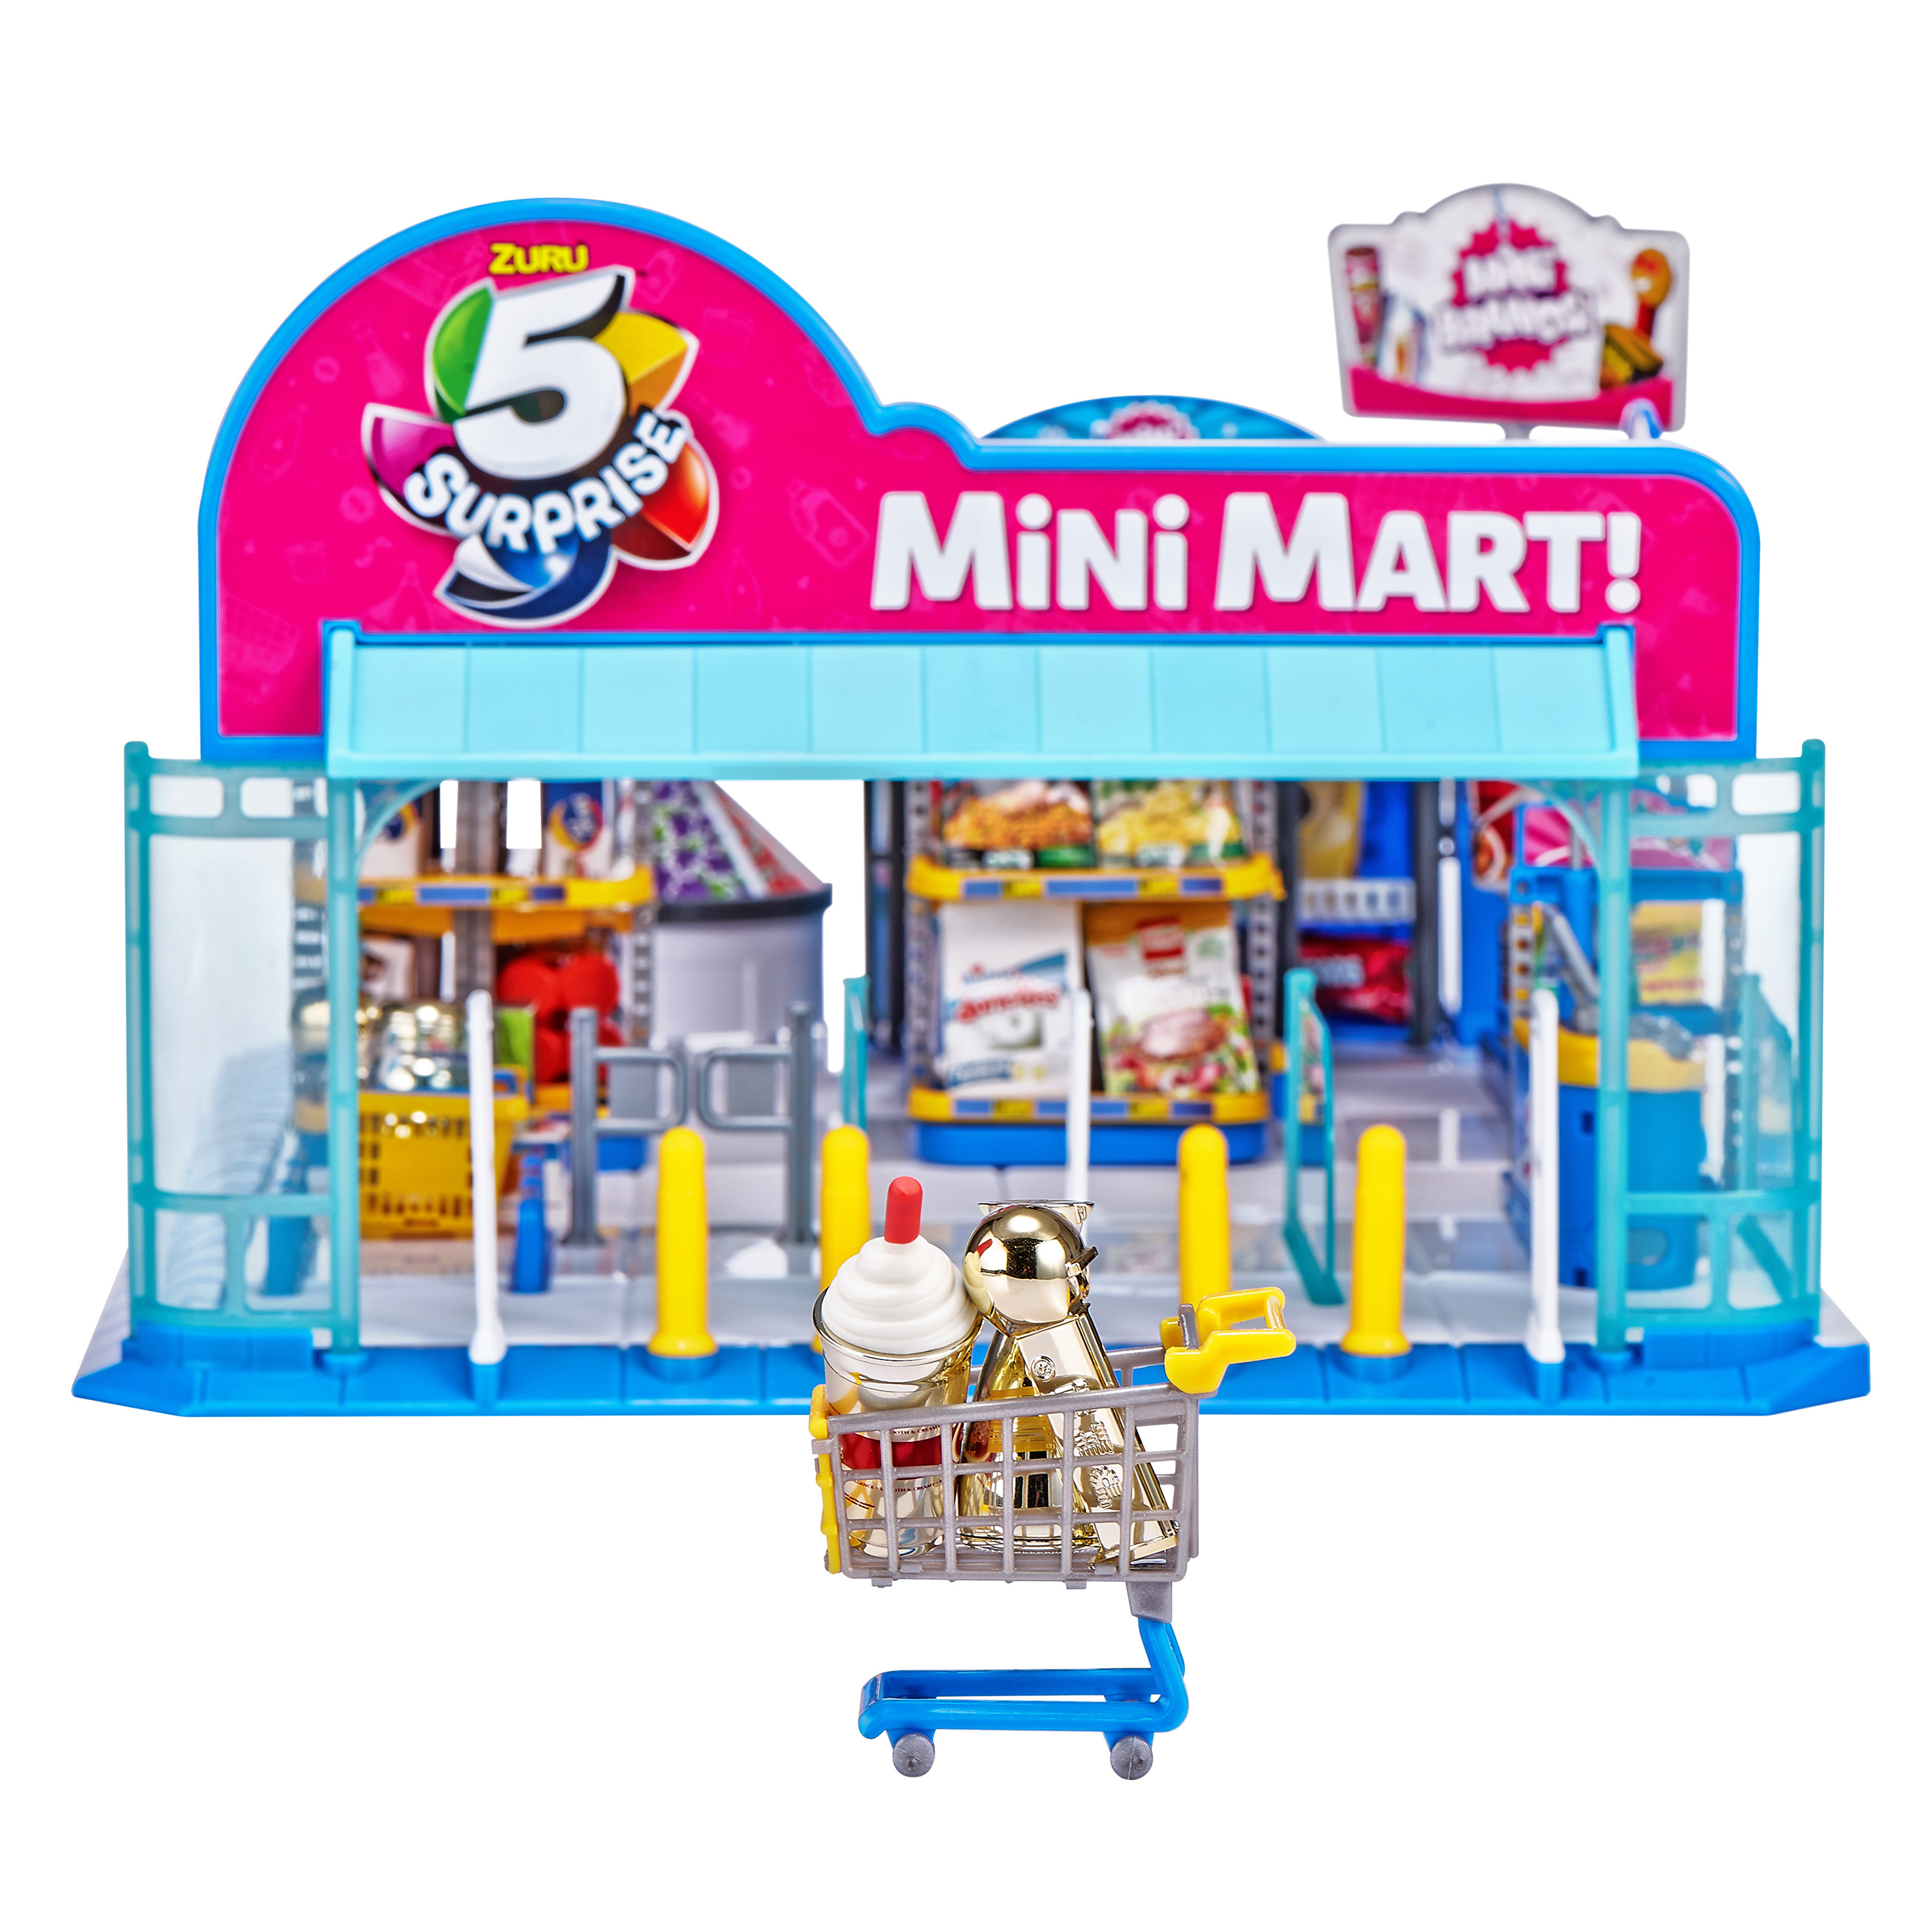 5 Surprise Mini Brands Series 2 Electronic Mini Mart with 4 Mystery Mini Brands Playset by ZURU - image 1 of 11